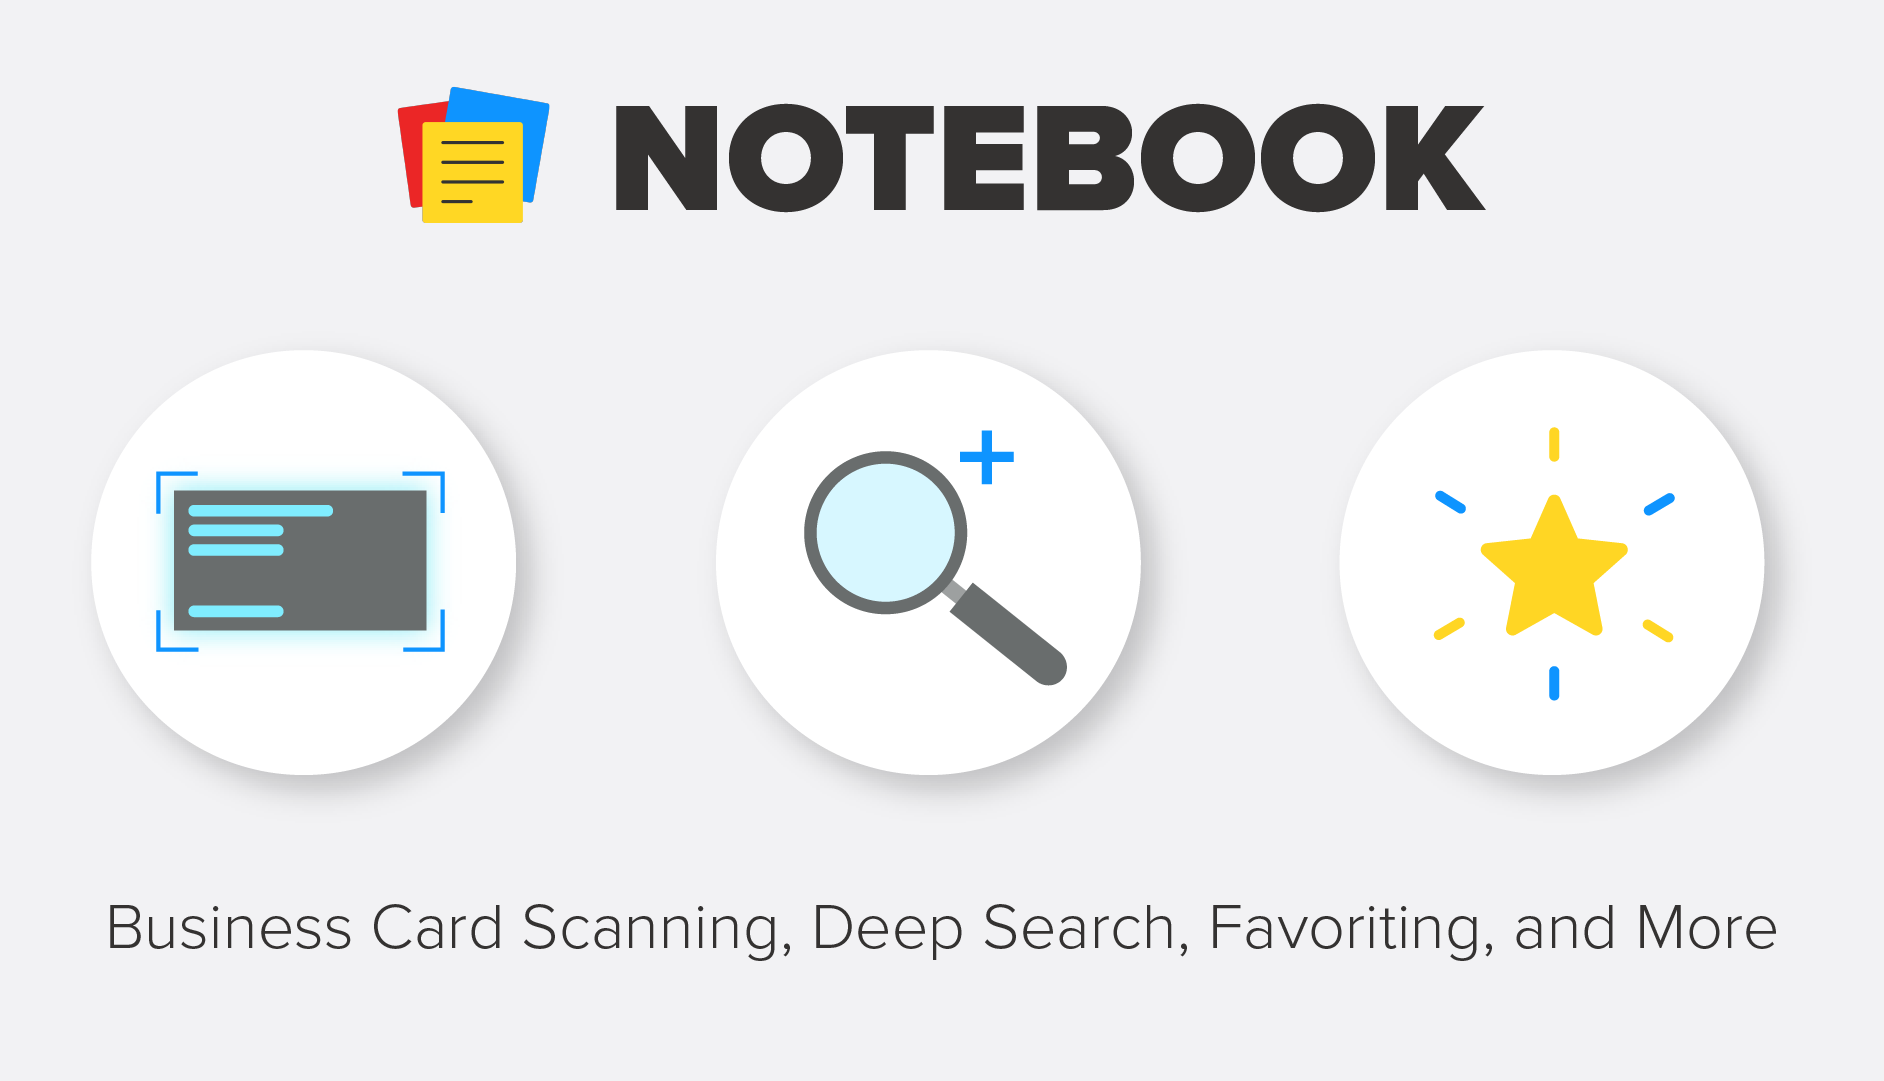 Notebook Update: Introducing Business Card Scanning, Deep Search, Favoriting, and More